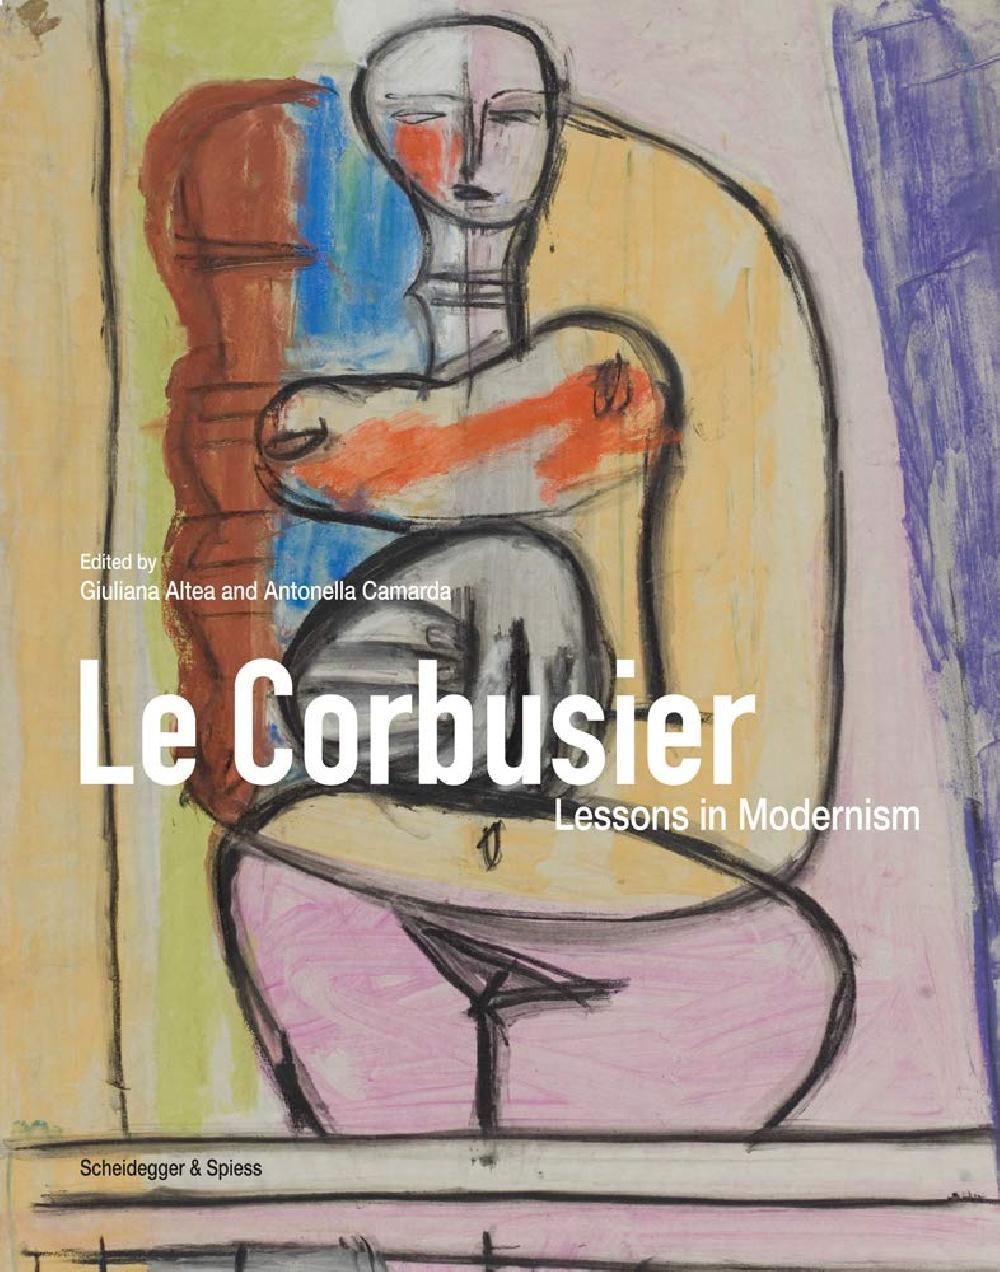 Le Corbusier Lessons in Modernism